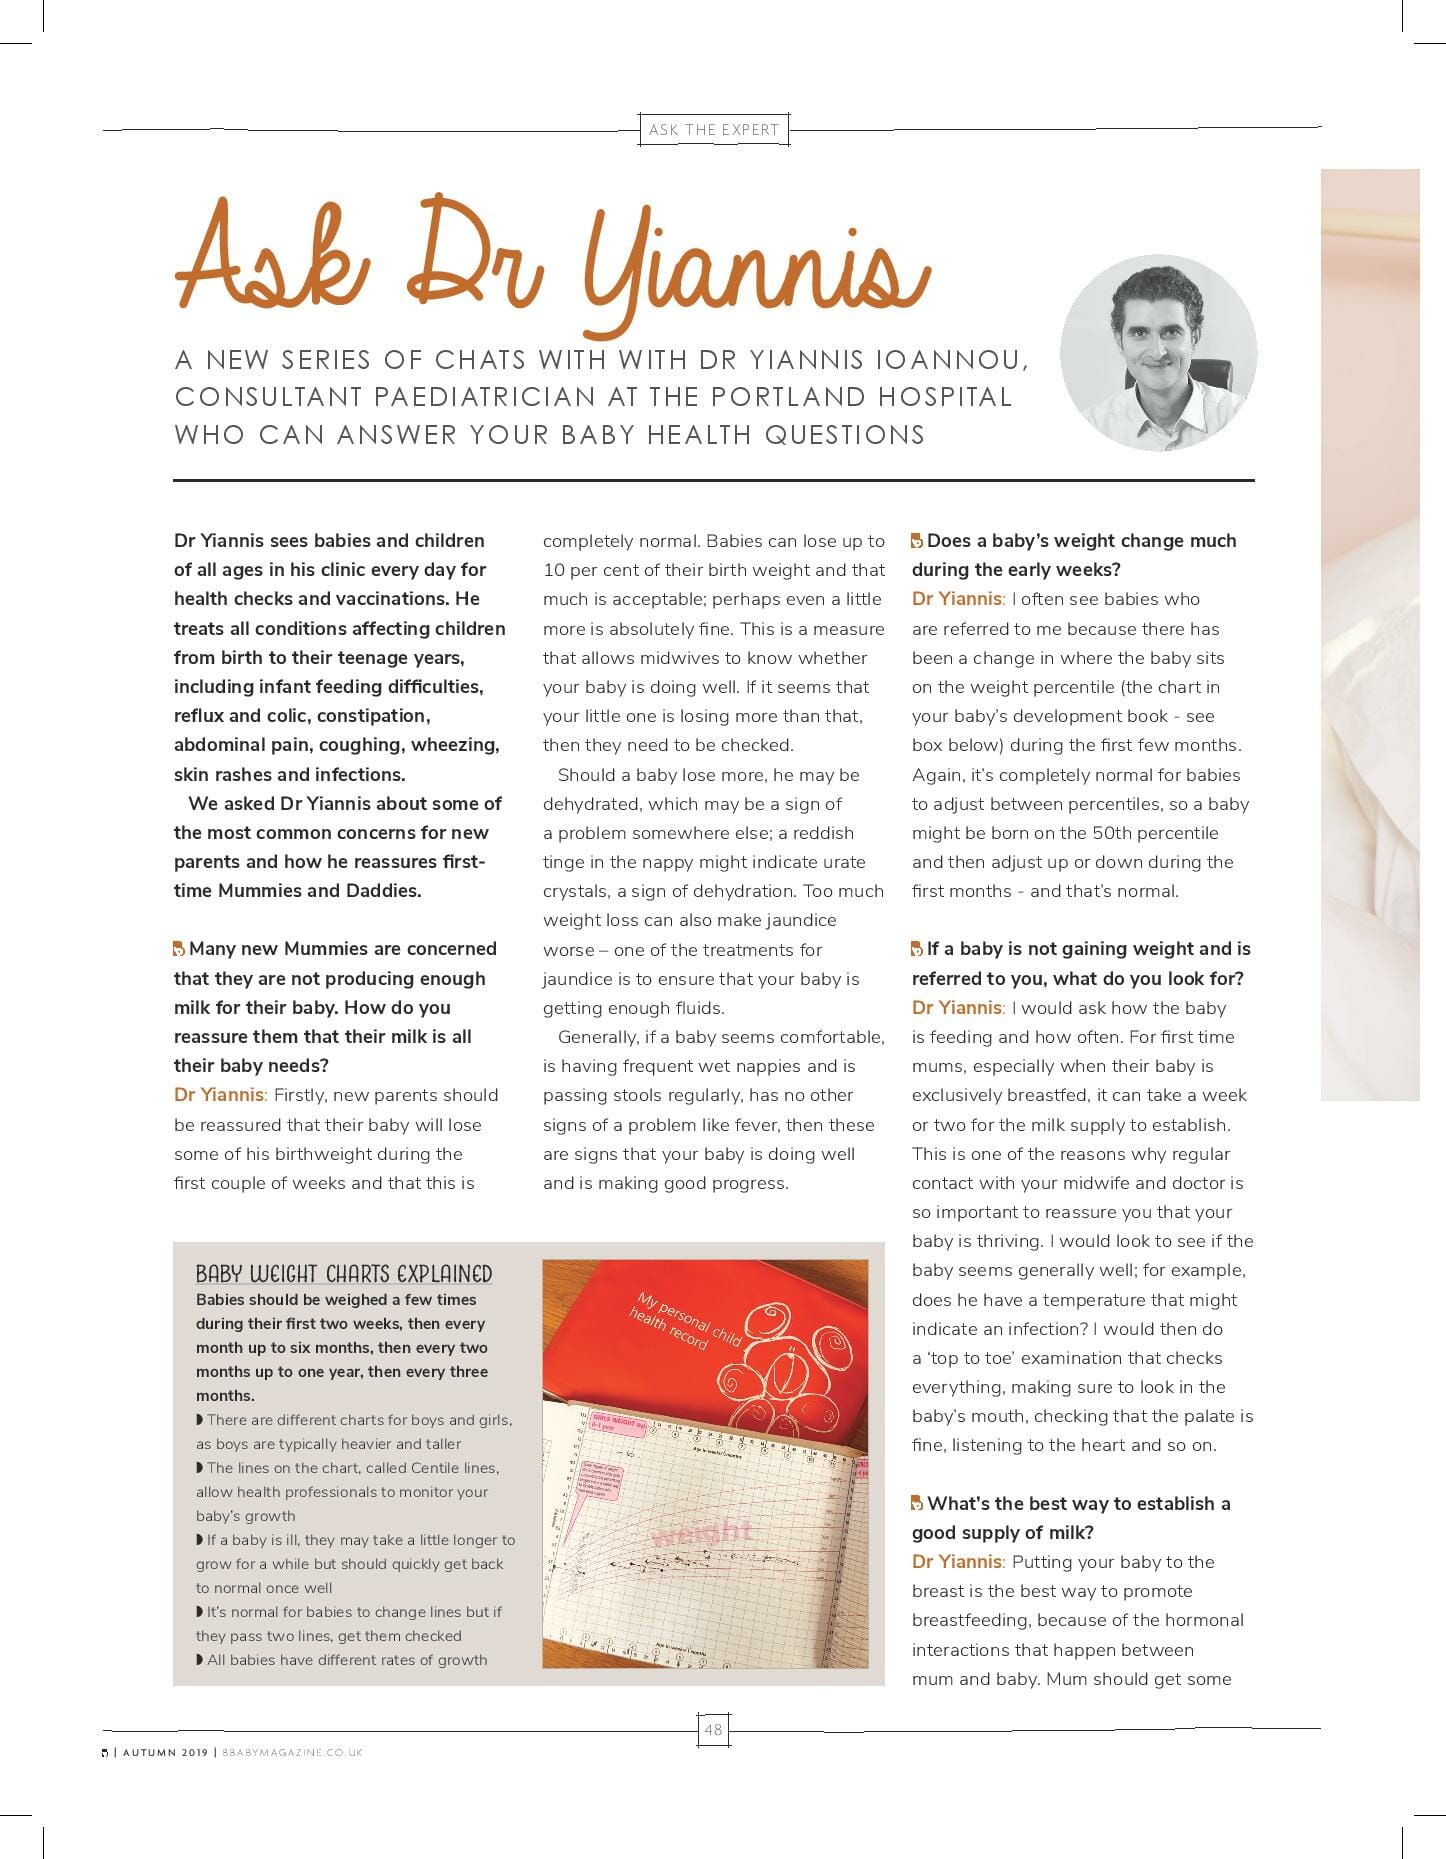 Ask Dr Yiannis article